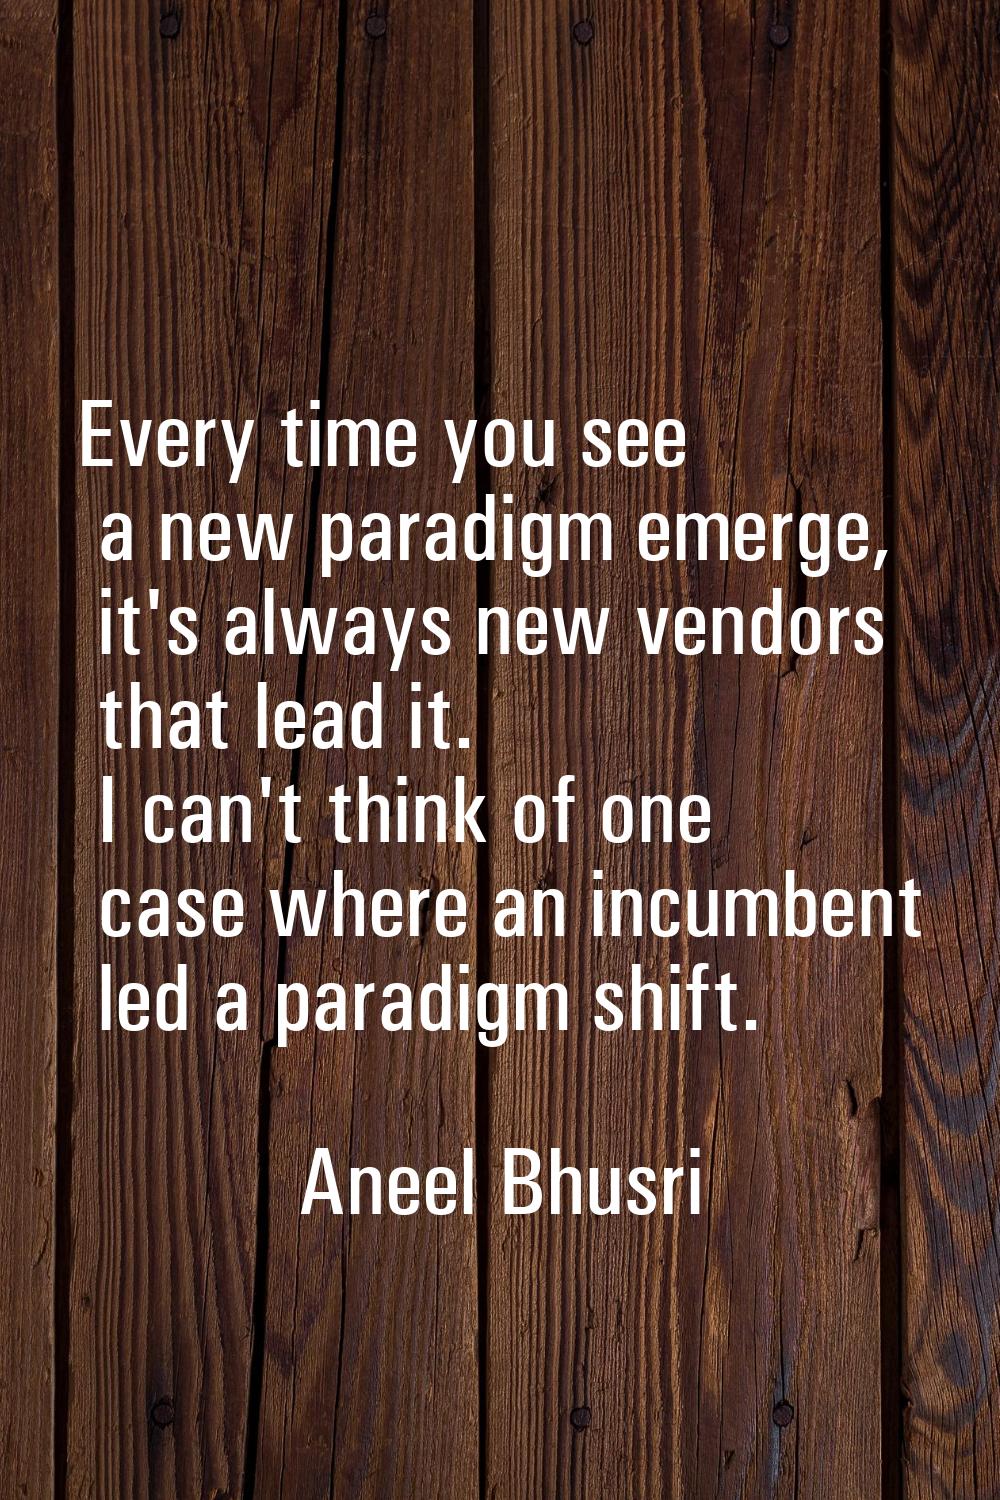 Every time you see a new paradigm emerge, it's always new vendors that lead it. I can't think of on